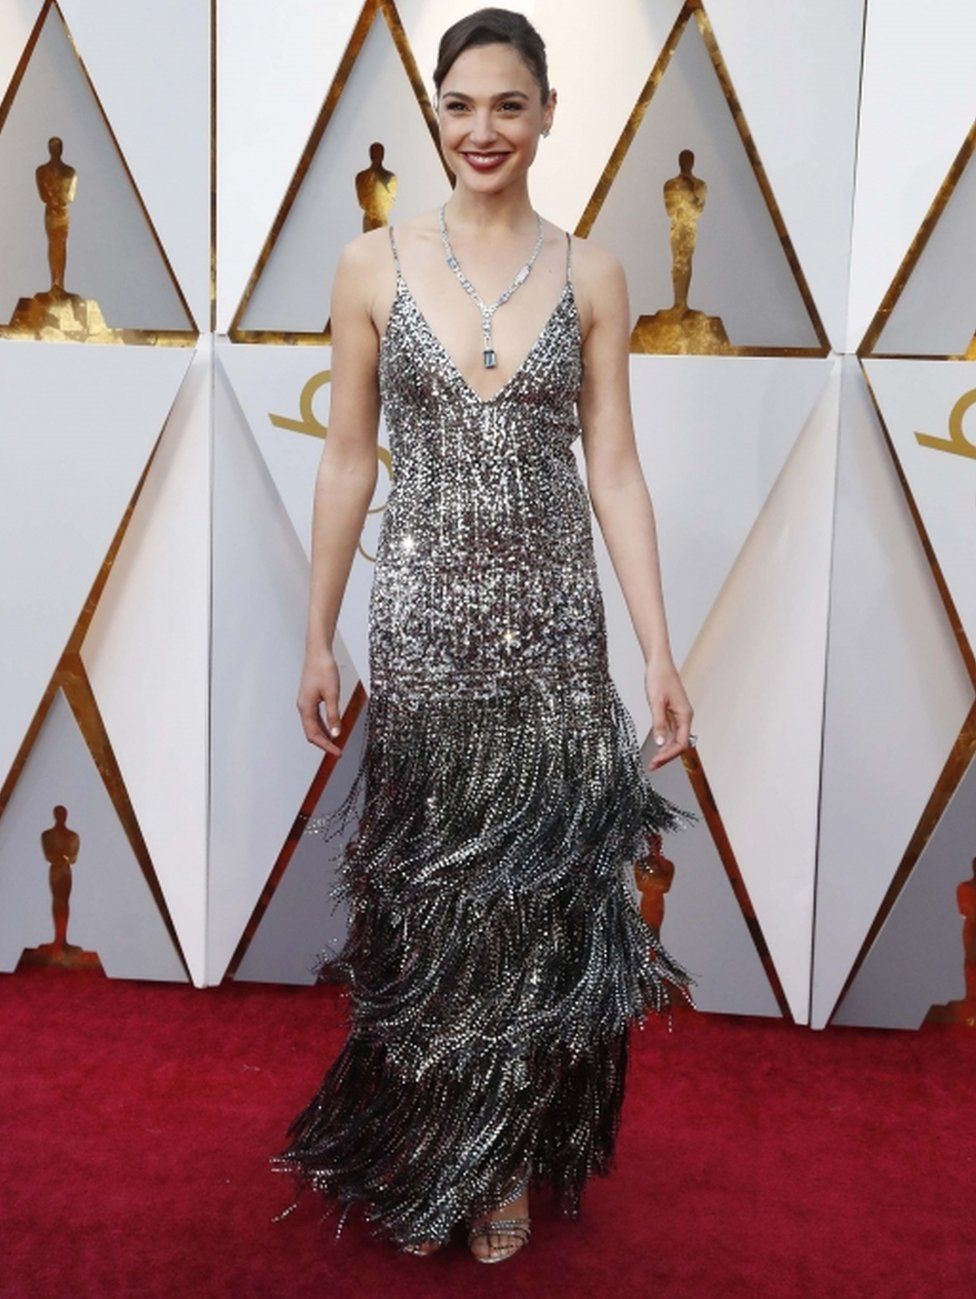 Wonder Woman actress Gal Gadot wears a strappy silver Givenchy couture dress on the Oscars red carpet